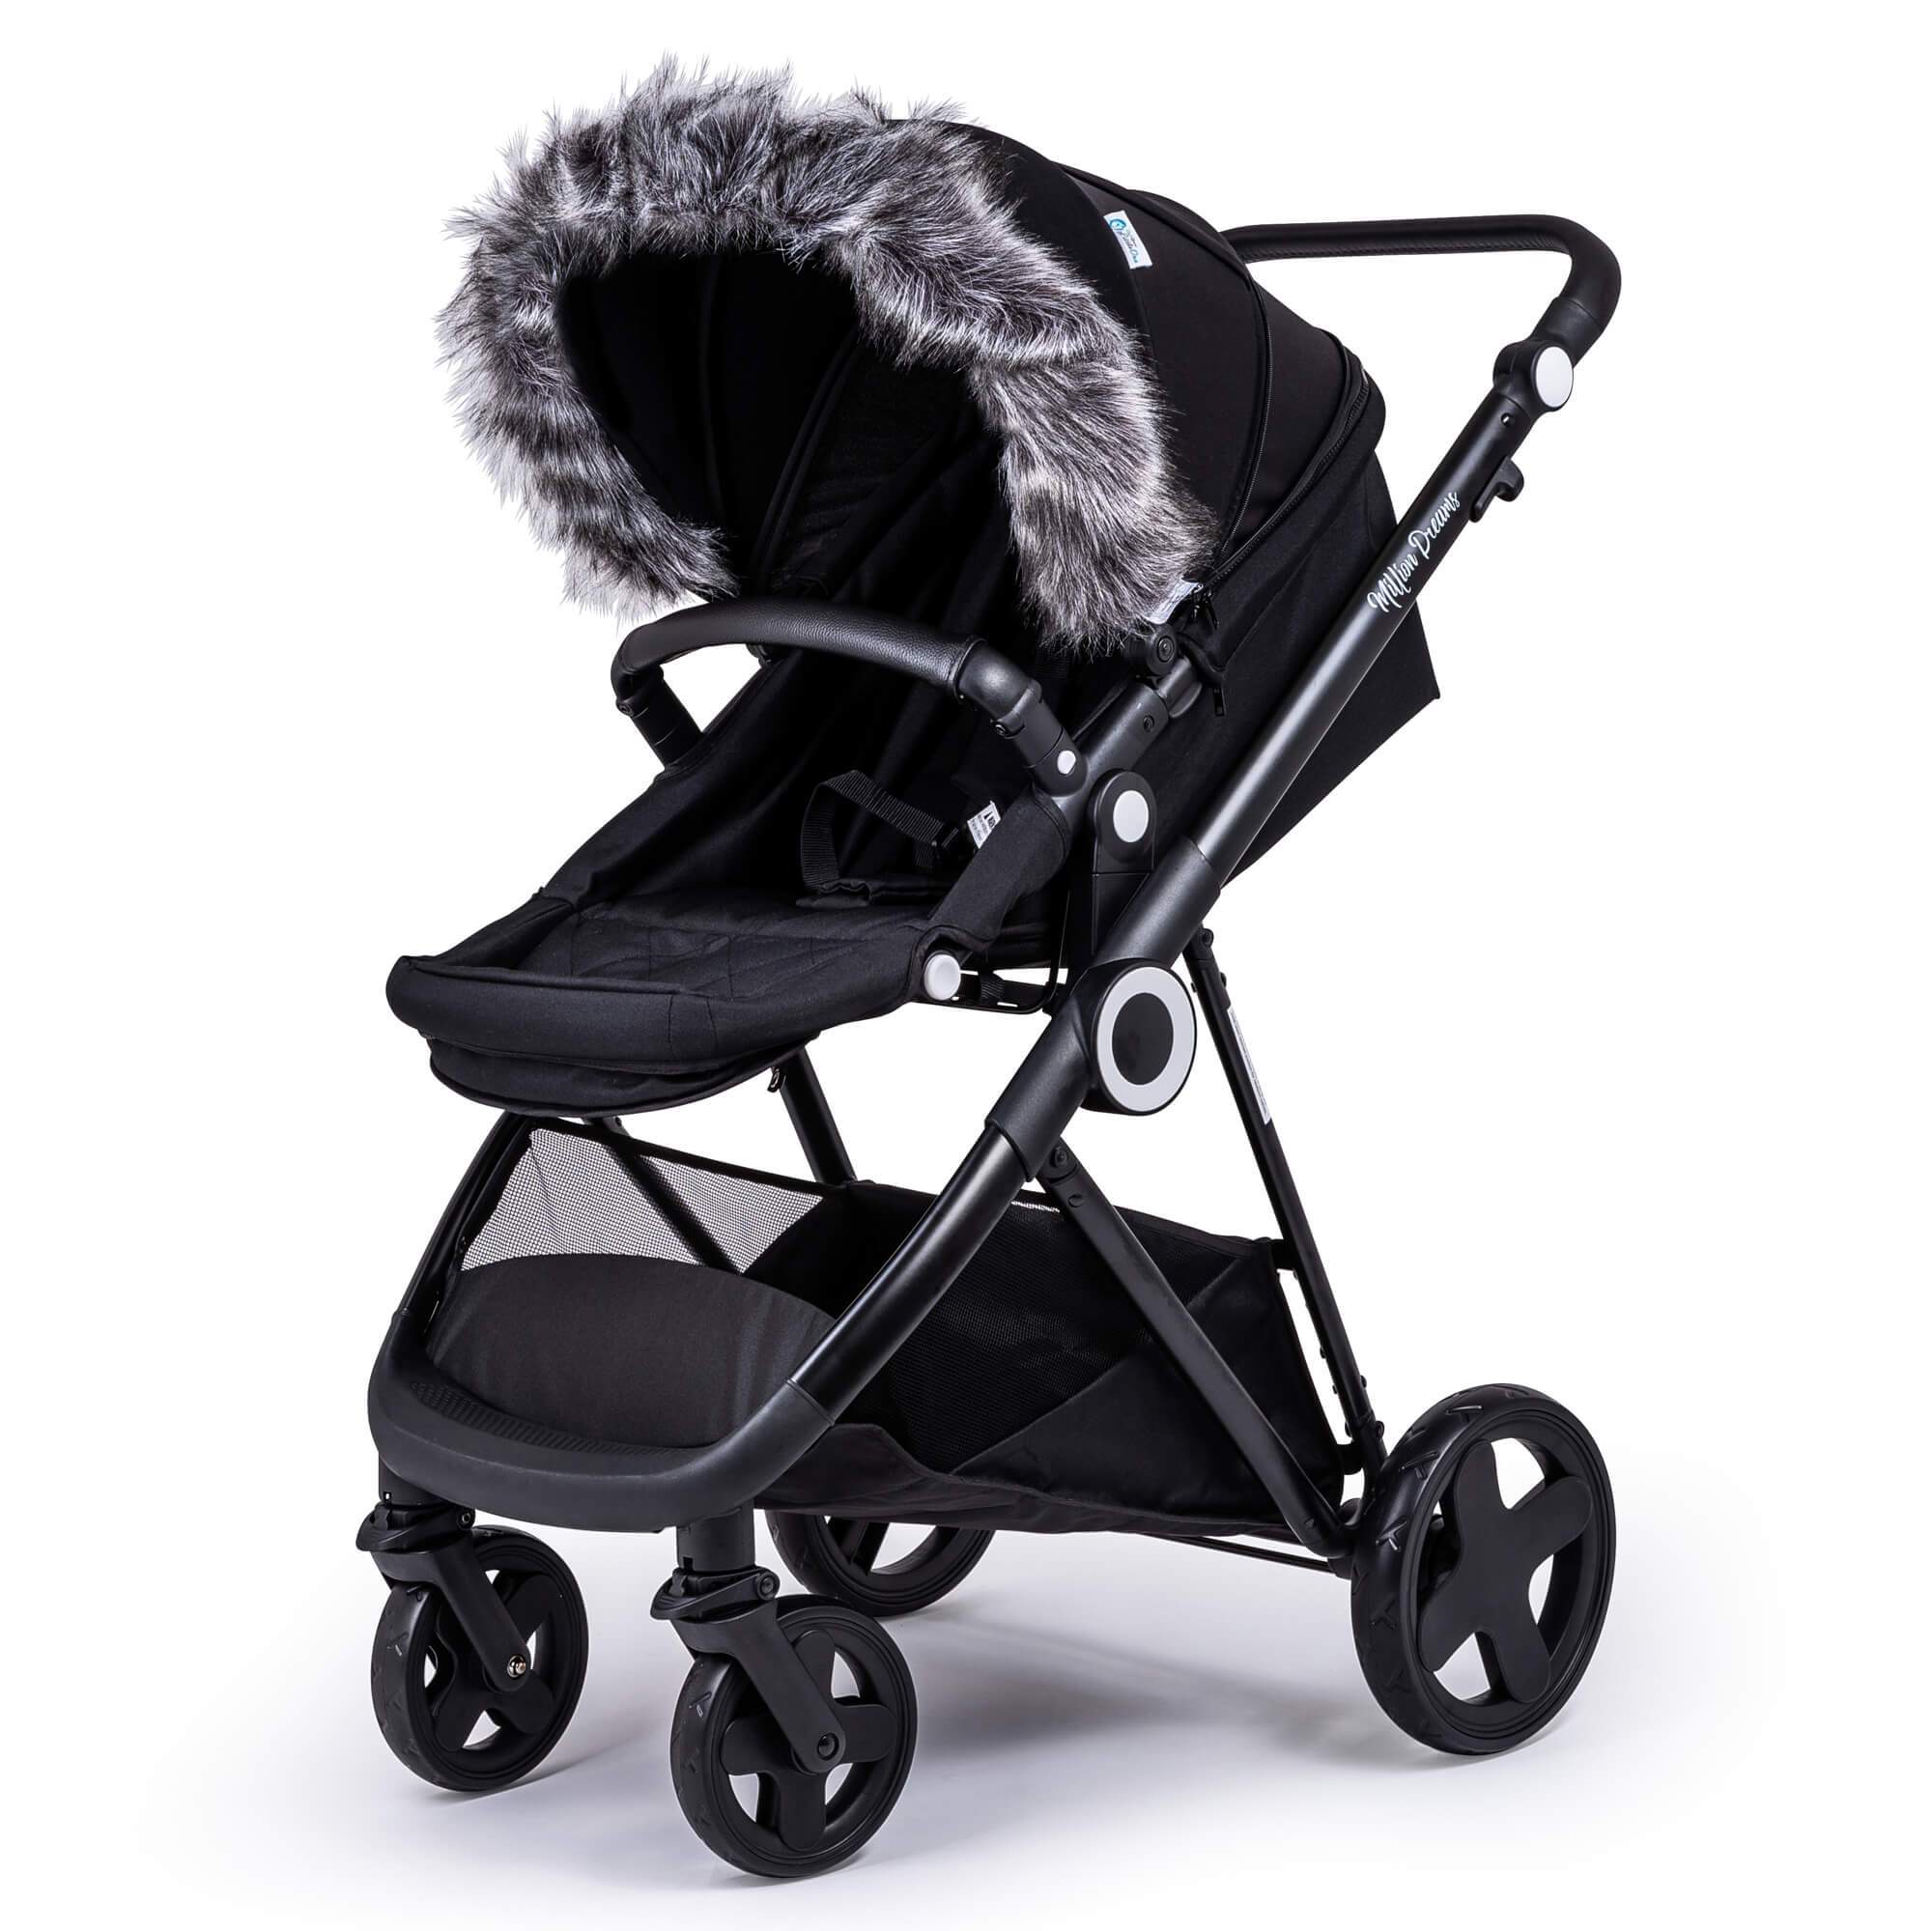 Pram Fur Hood Trim Attachment for Pushchair Compatible with My Babiie - Dark Grey / Fits All Models | For Your Little One